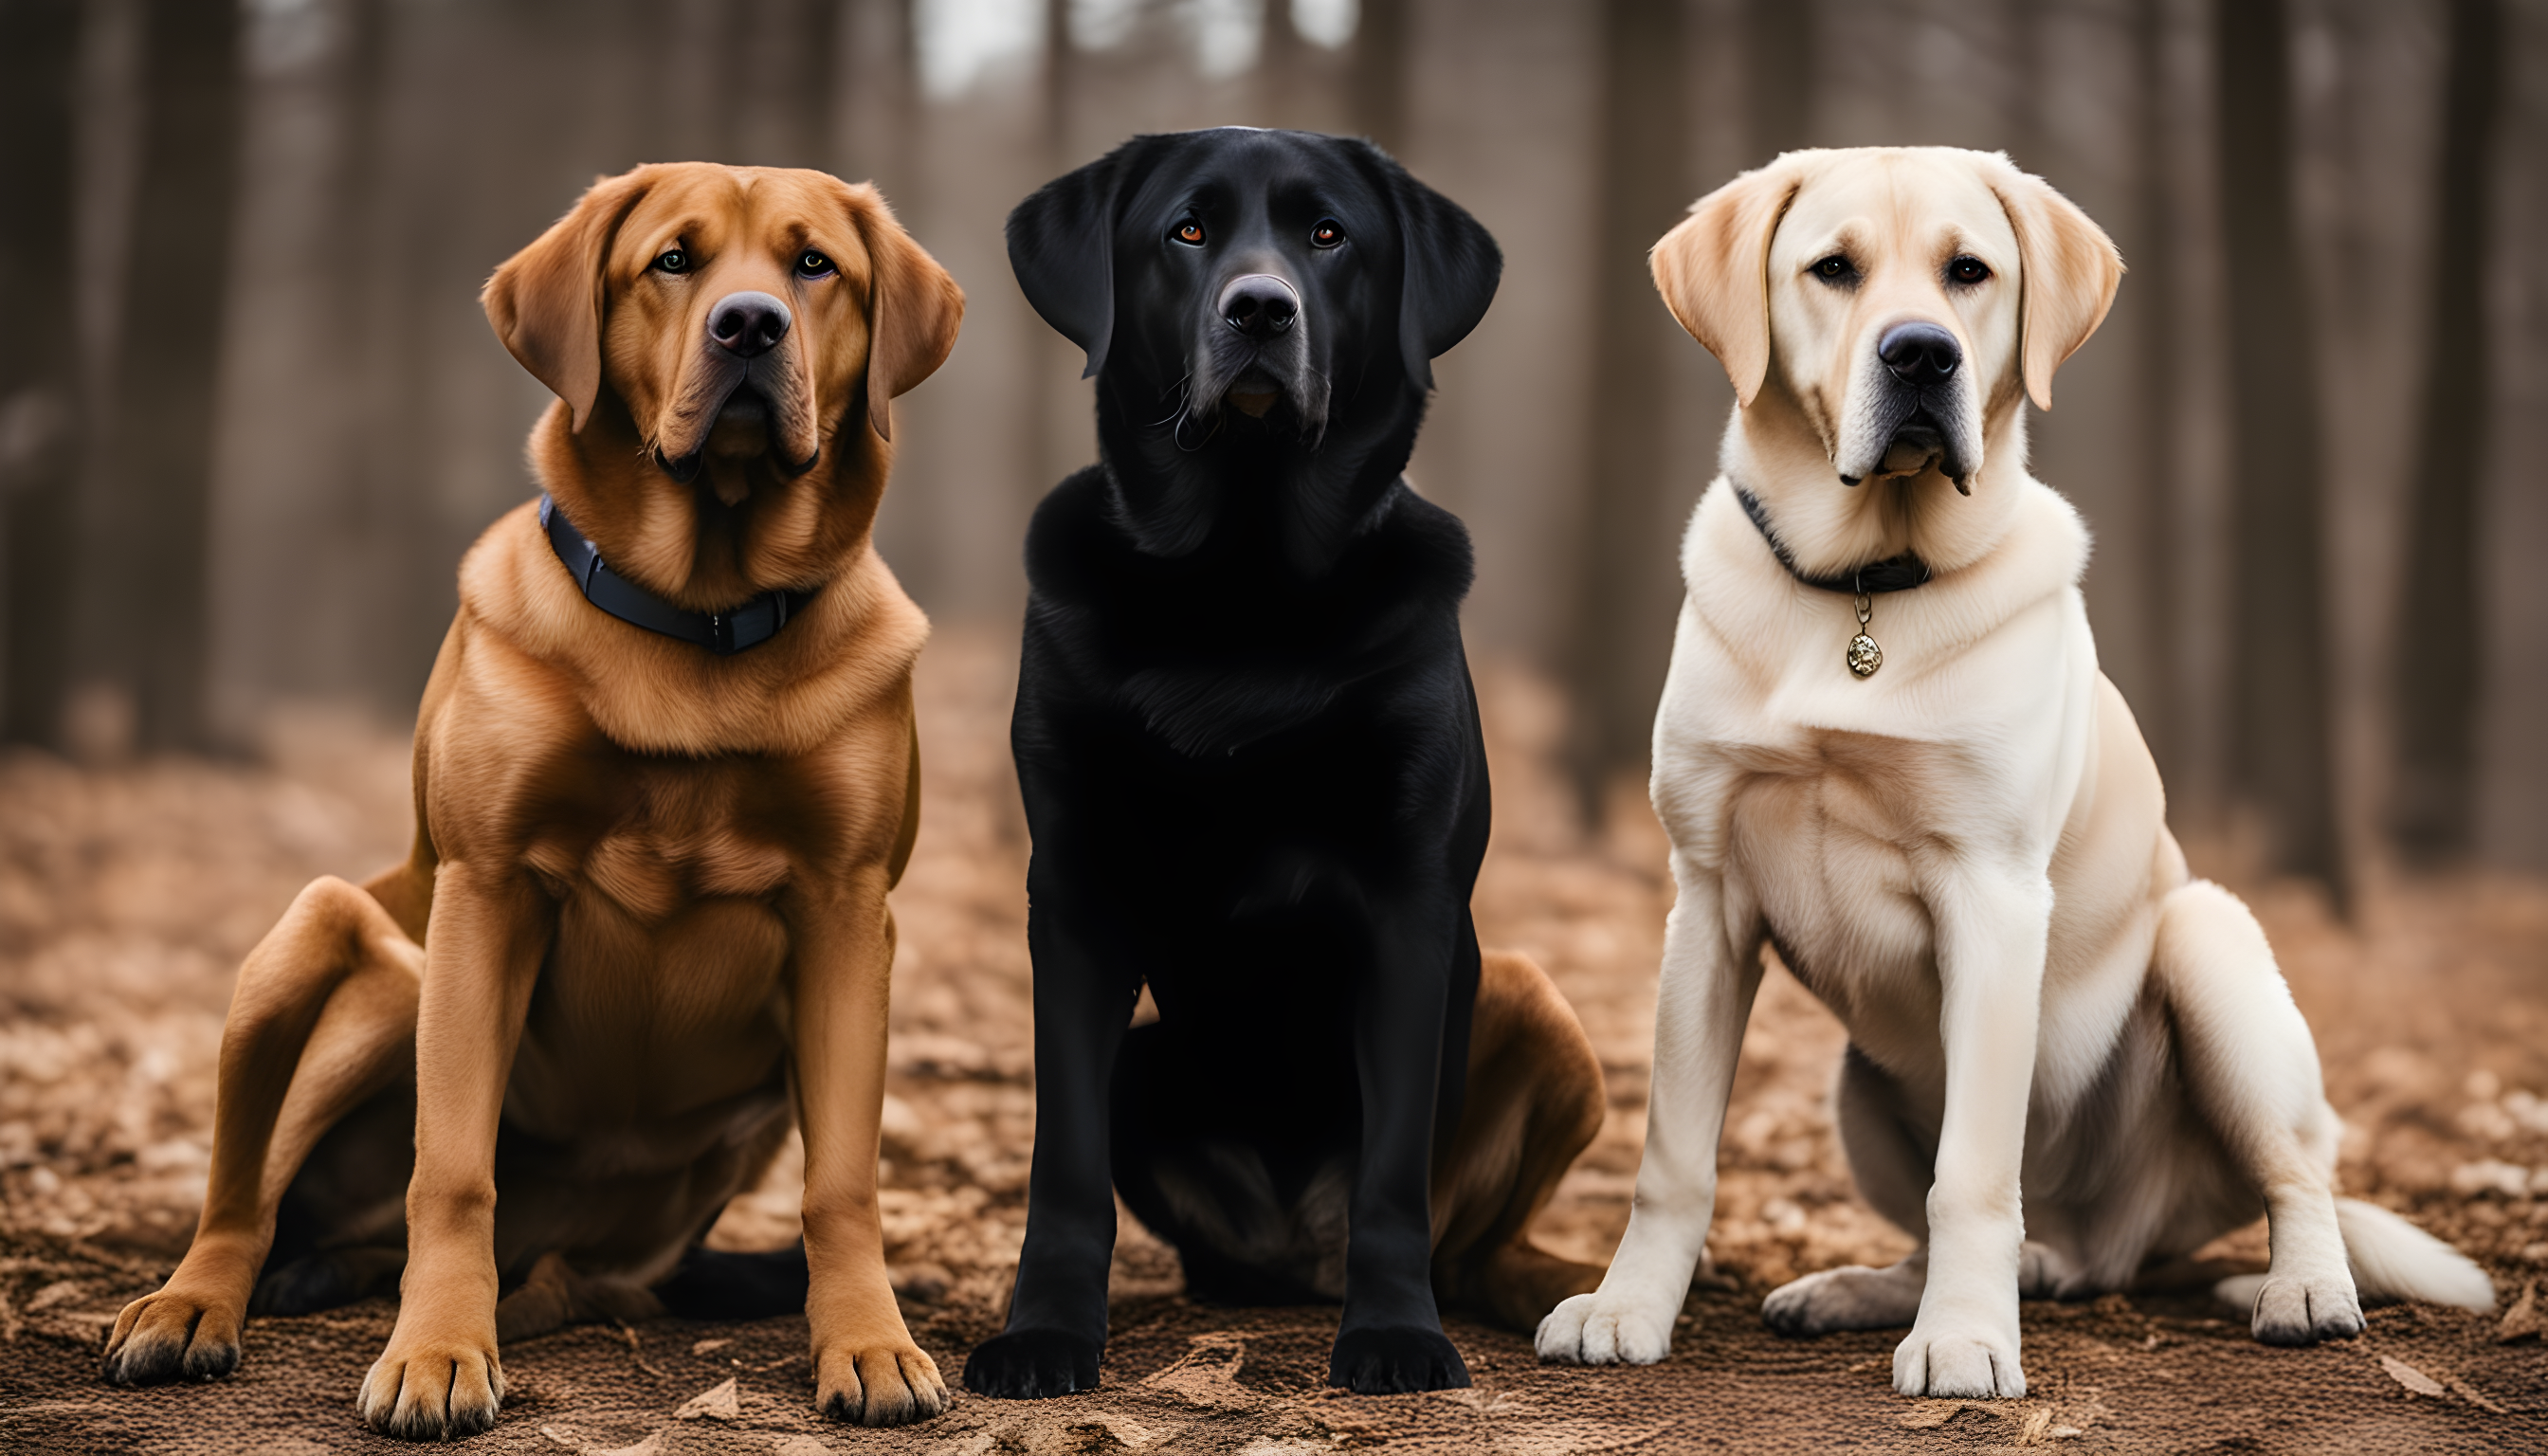 American Lab and British Lab standing paw-to-paw like heavyweight champs